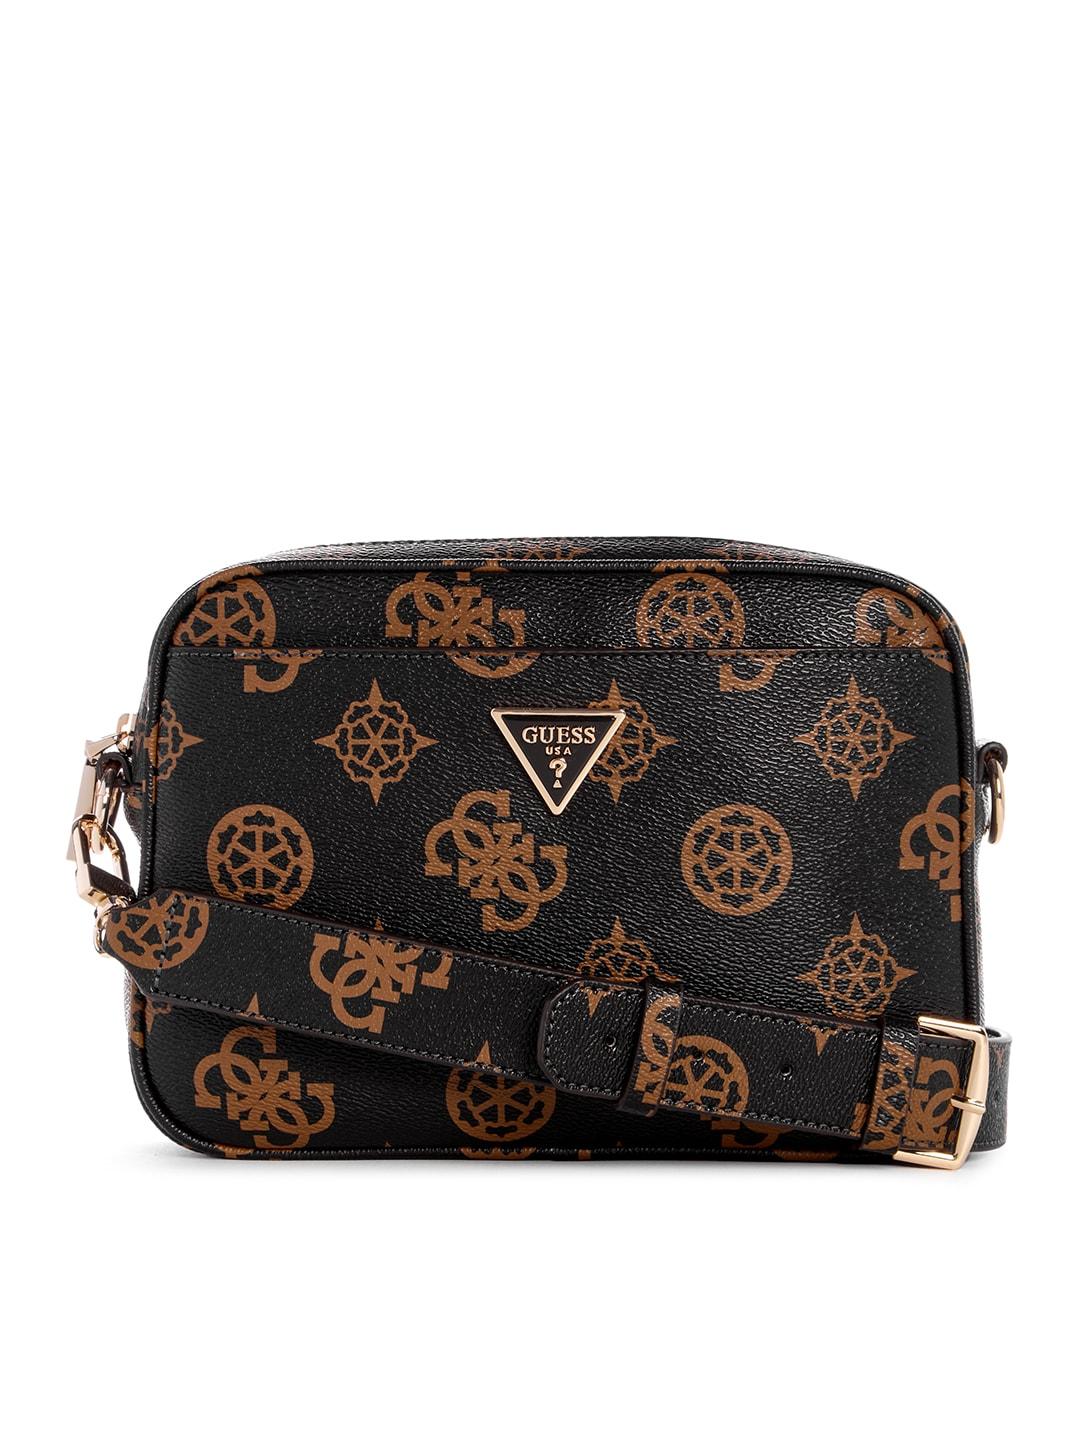 guess-brand-logo-printed-structured-sling-bag